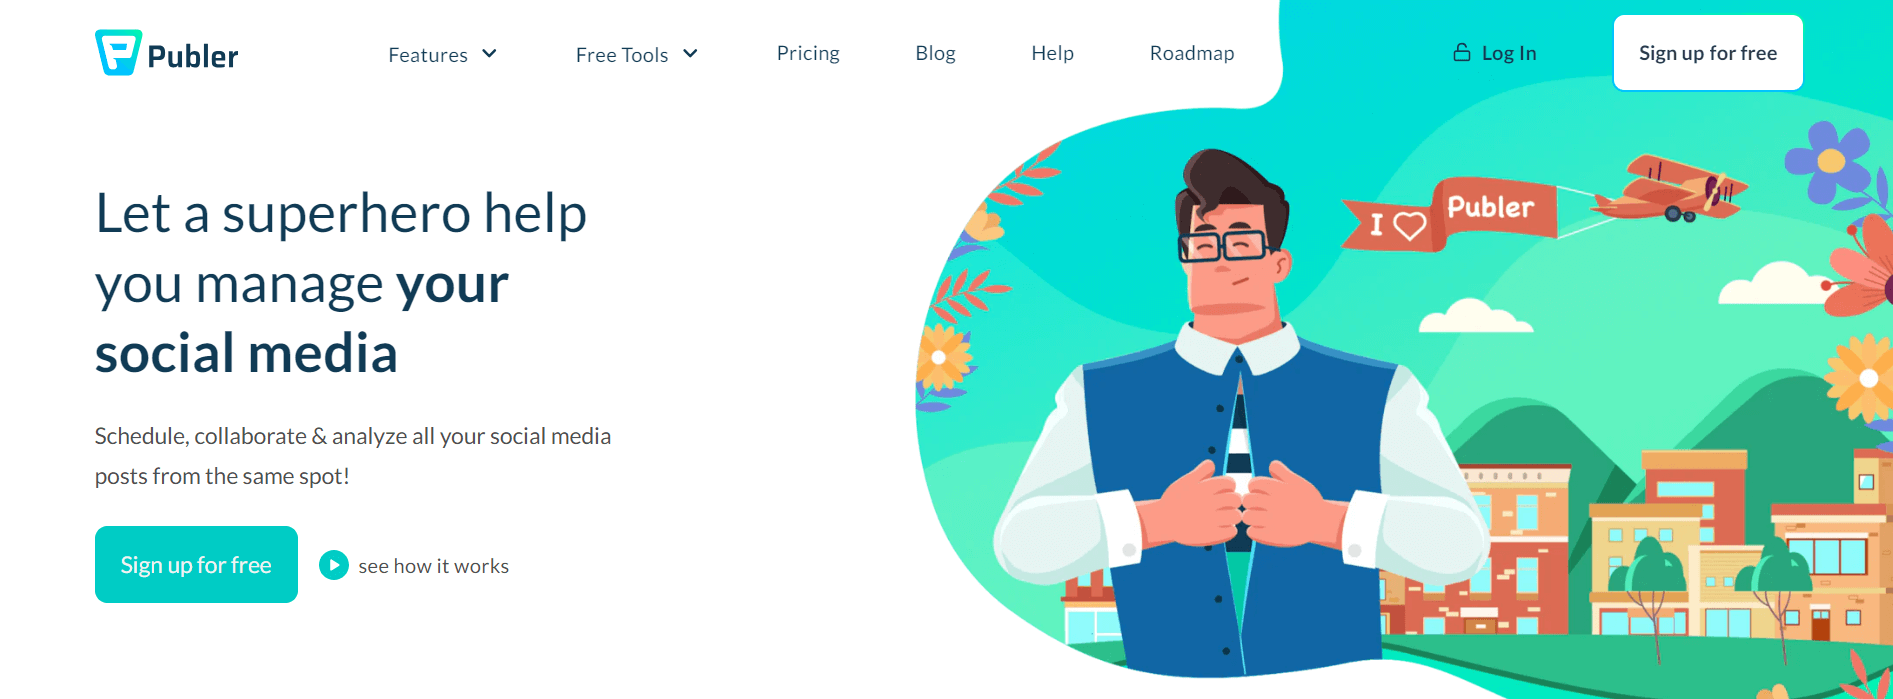 Homepage of Publer featuring a whimsical superhero-themed illustration, promoting their social media management tools with the tagline "Let a superhero help you manage your social media," along with a signup option.